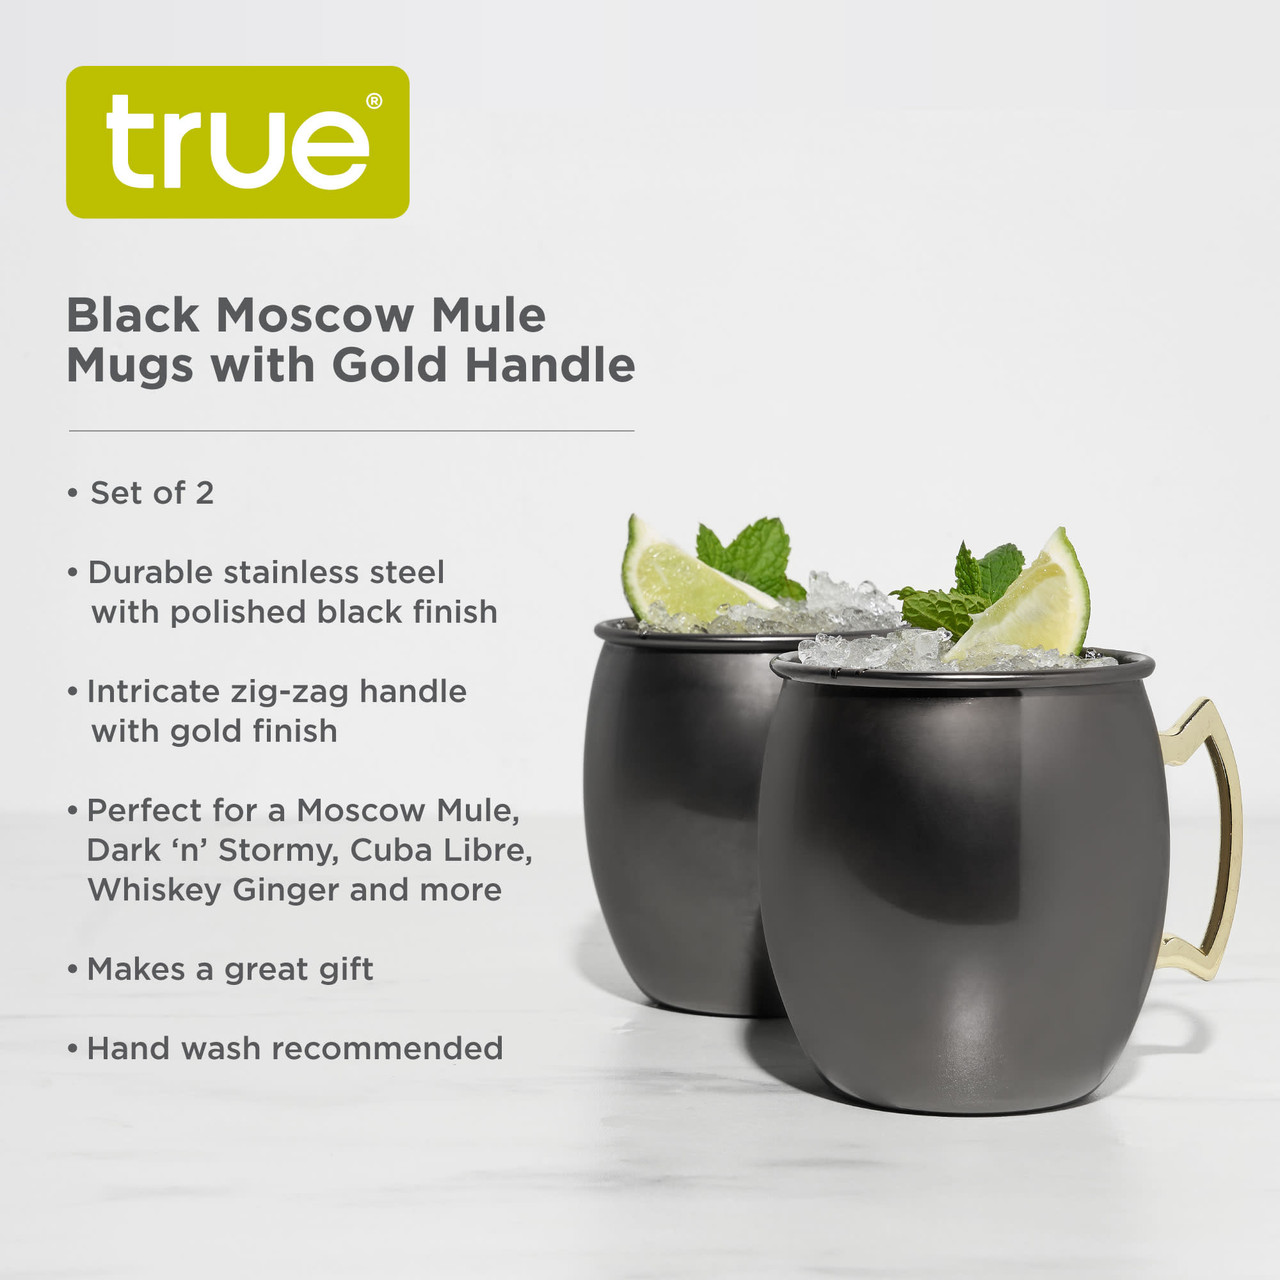 Black Moscow Mule Mug with Gold Handle, 2 Pack, by True